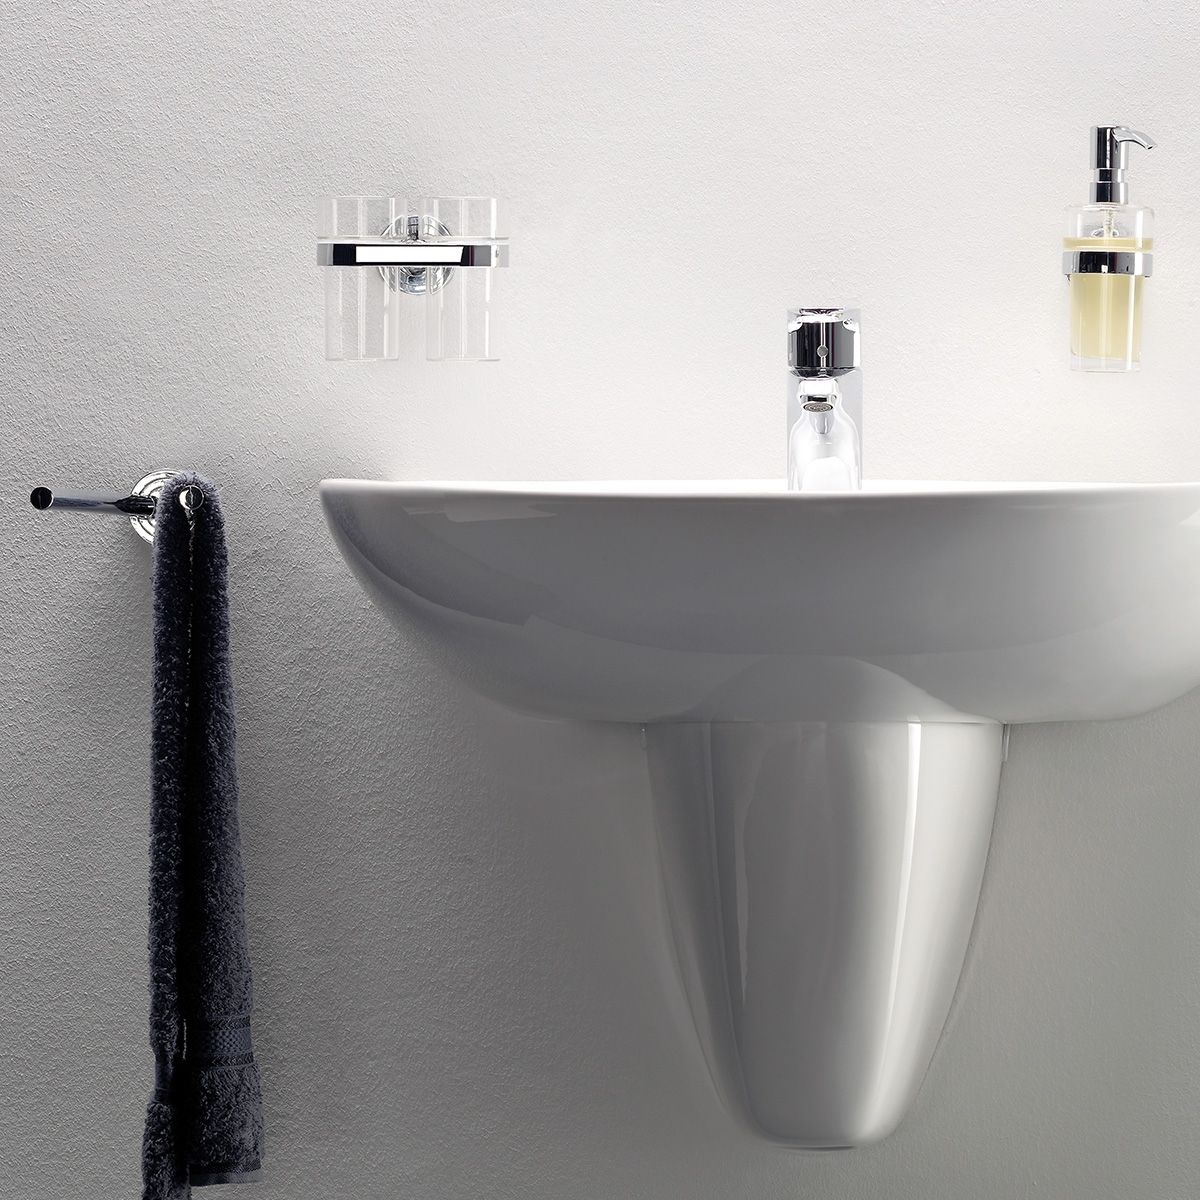 Wall-Hung Bathroom Sinks Are Perfect for Any Design